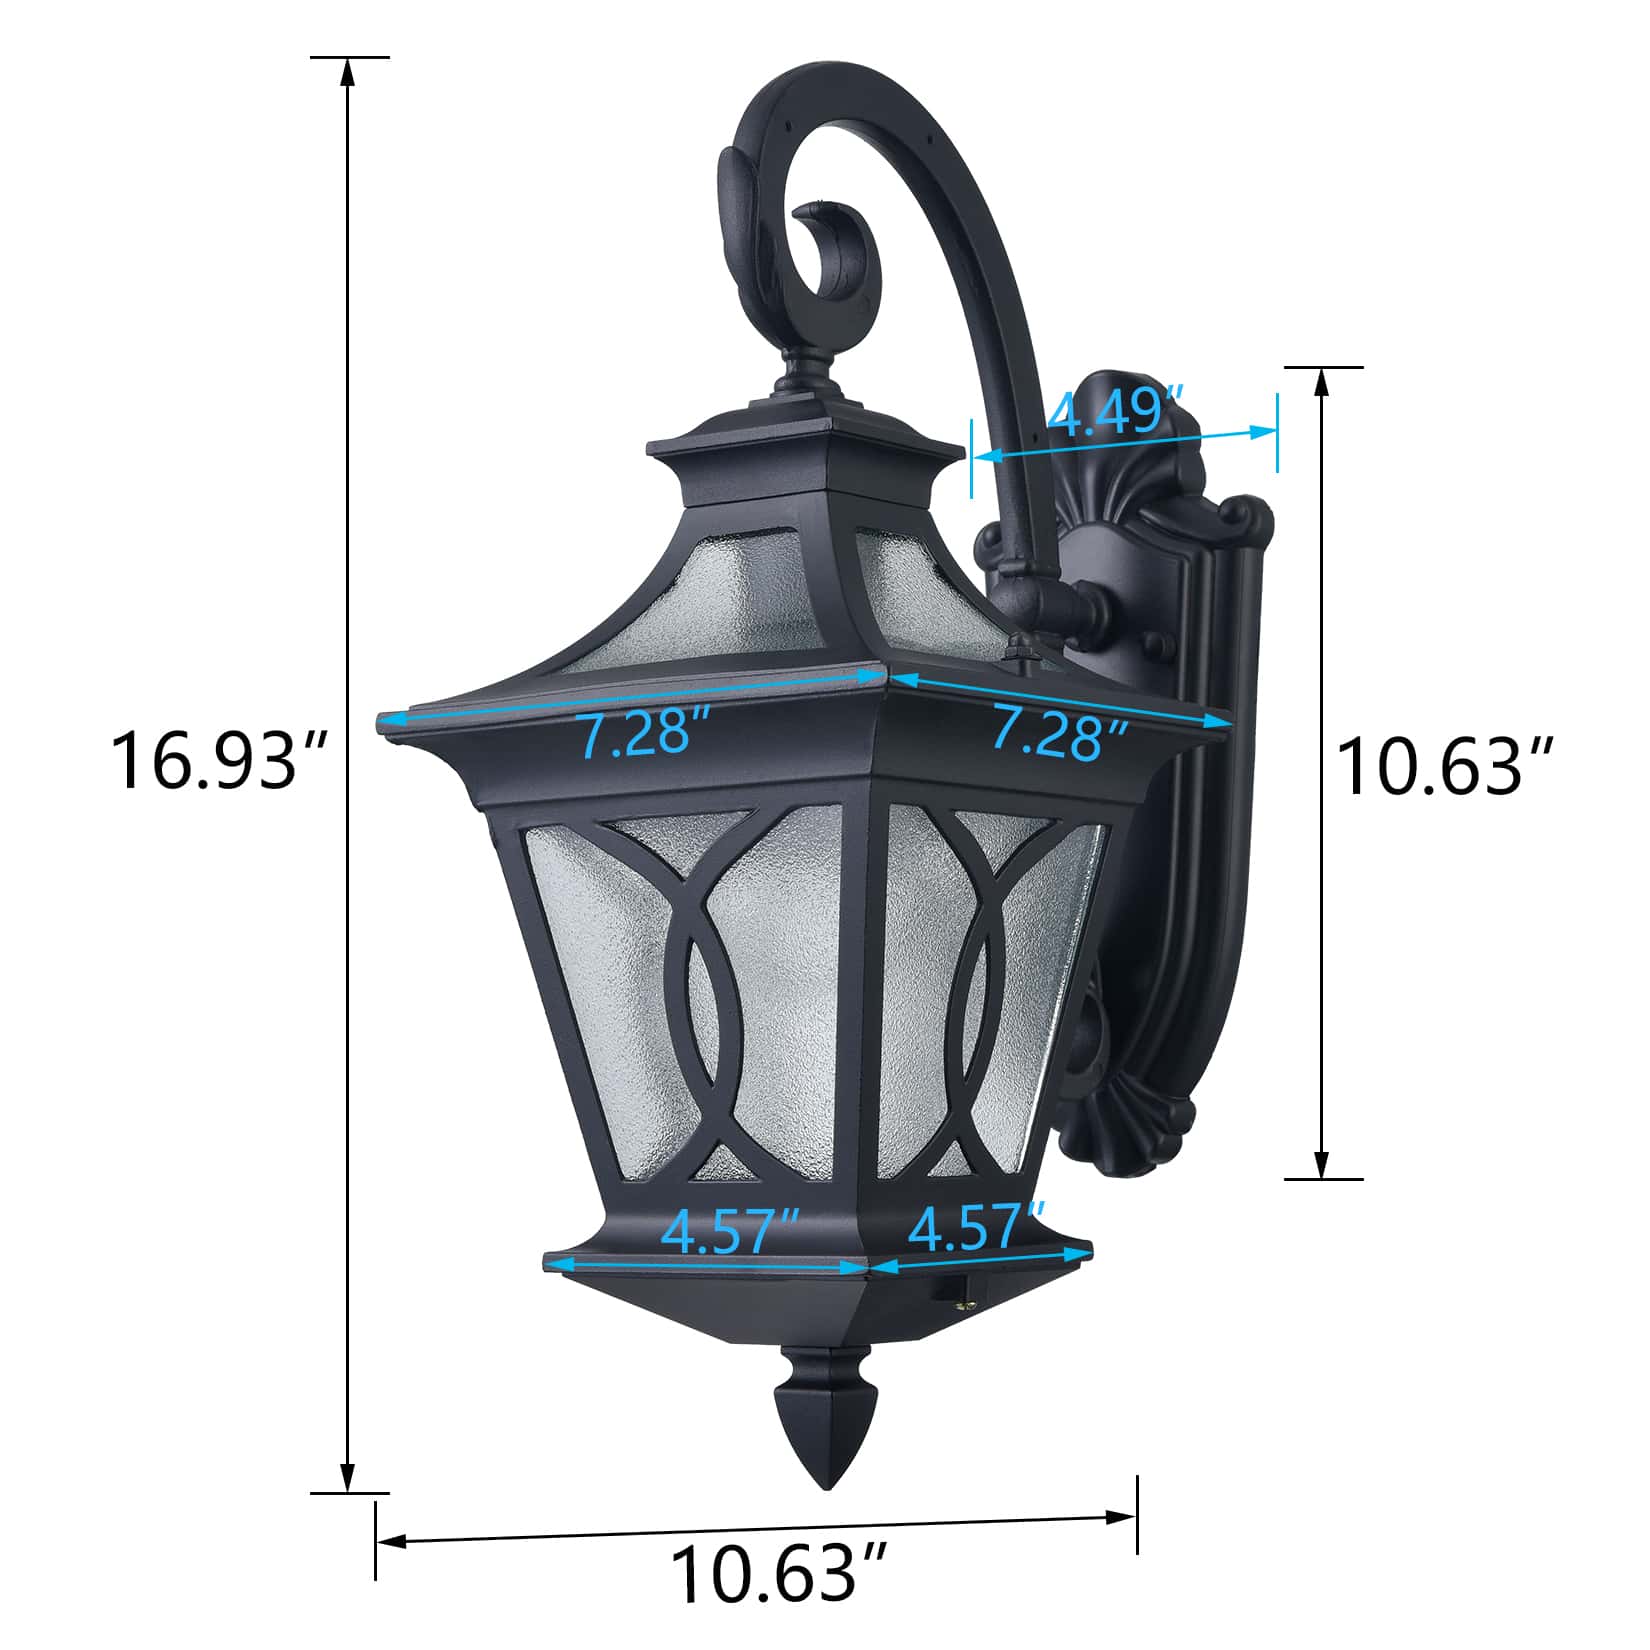 Black Outdoor Wall Sconce Light with Water Glass Shade